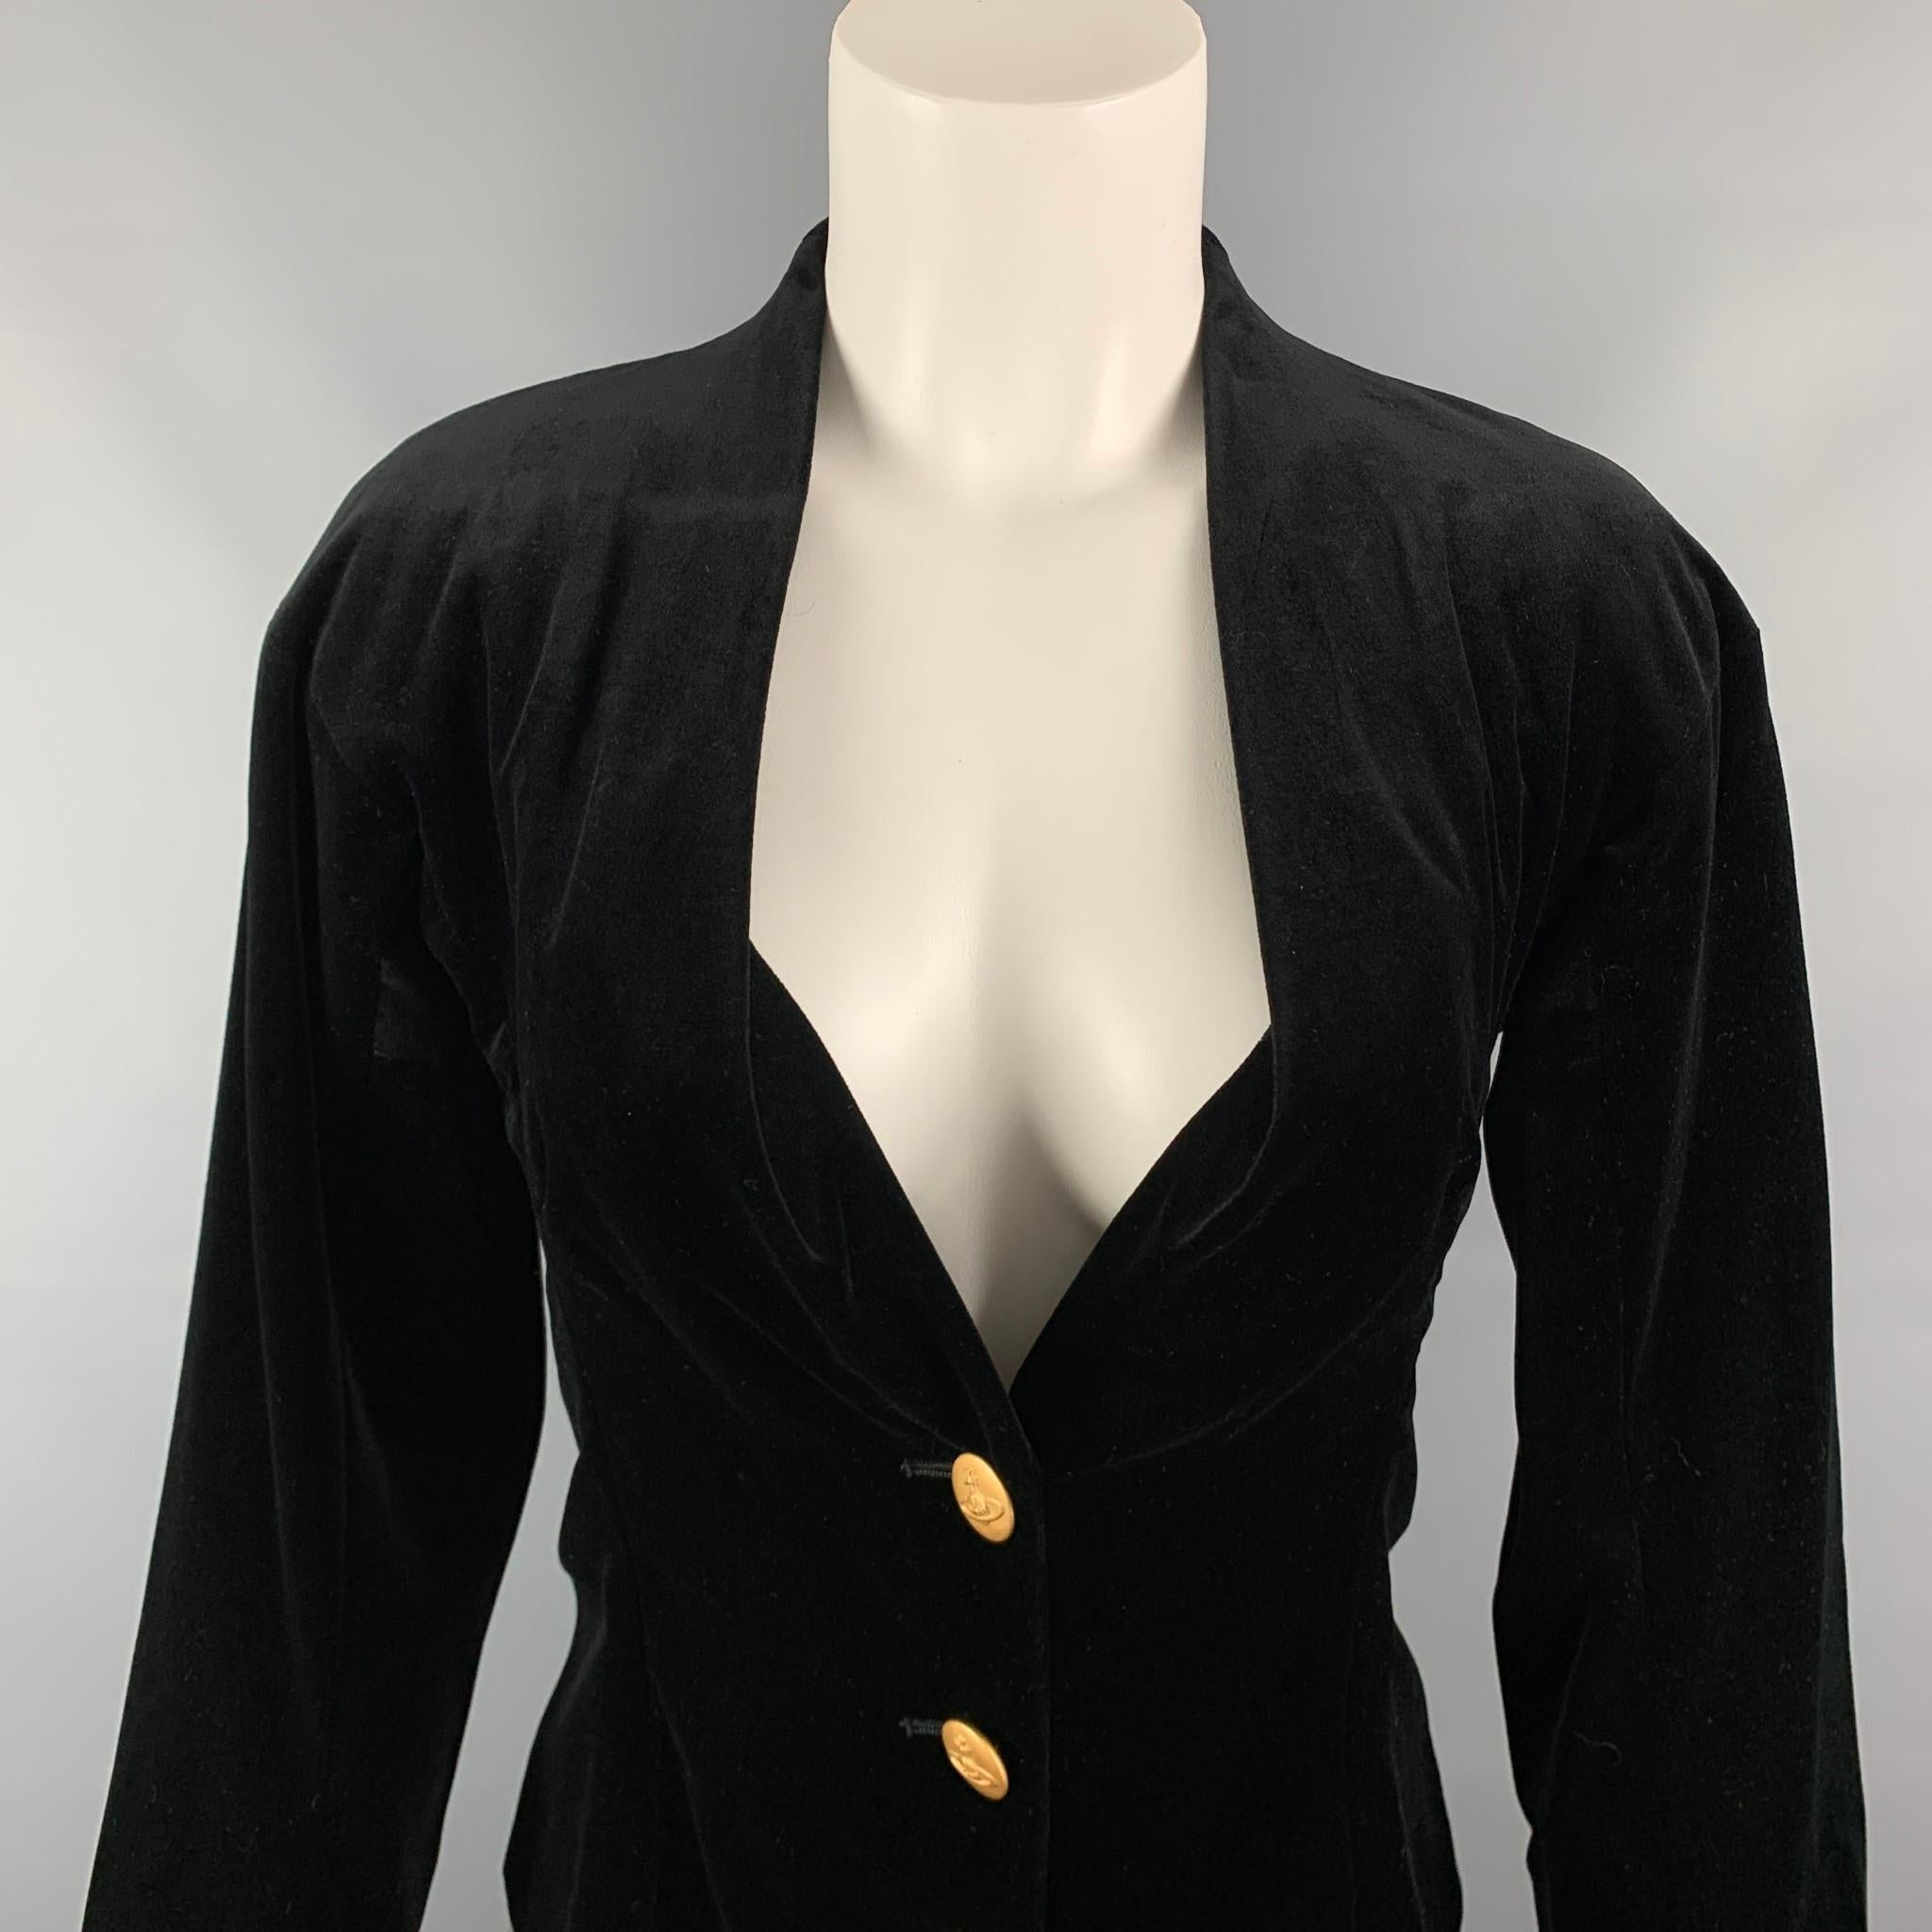 VIVIENNE WESTWOOD RED LABEL jacket comes in a black velvet cotton with a full liner featuring a collarless style and a gold toned buttoned closure. Made in Italy.

Very Good Pre-Owned Condition.
Marked: 40

Measurements:

Shoulder: 17.5 in.
Bust: 34